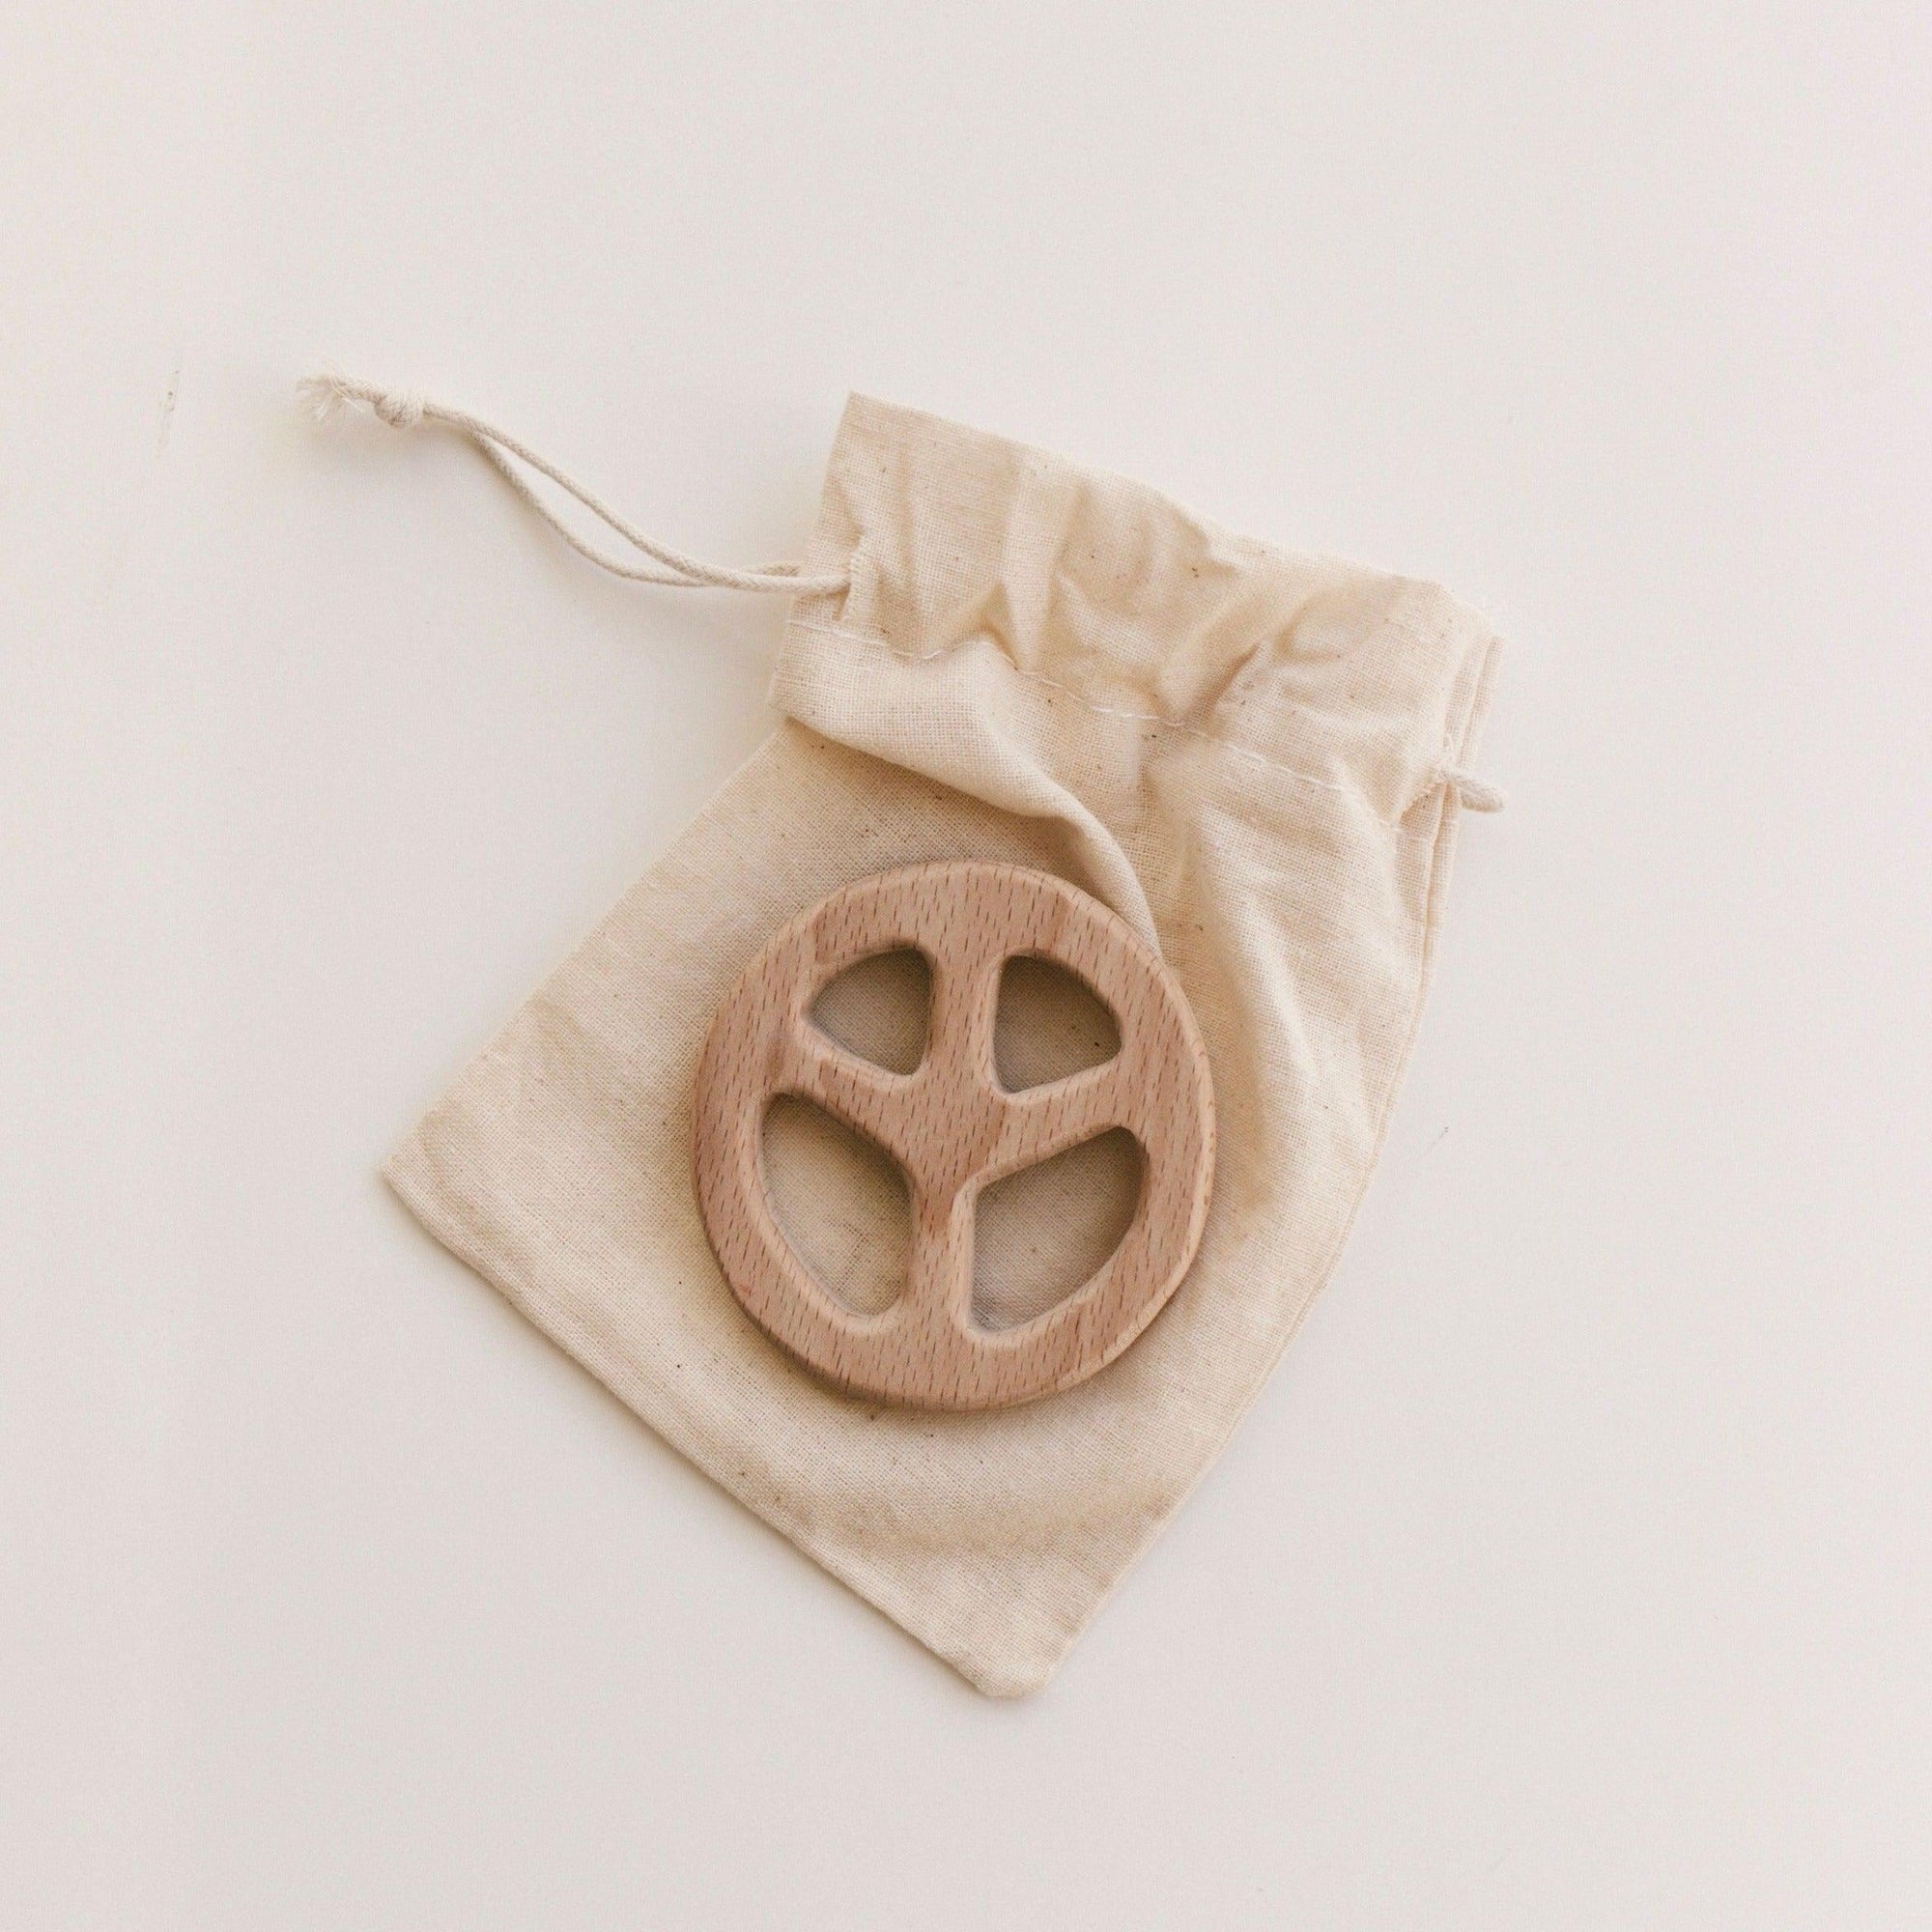 A simple and beautiful eco friendly natural wood teether. Specially designed for relieving delicate sore gums when teething. An added bonus when purchasing wooden pieces for your little ones is that they become a wonderful keepsake item for you to keep and cherish forever.